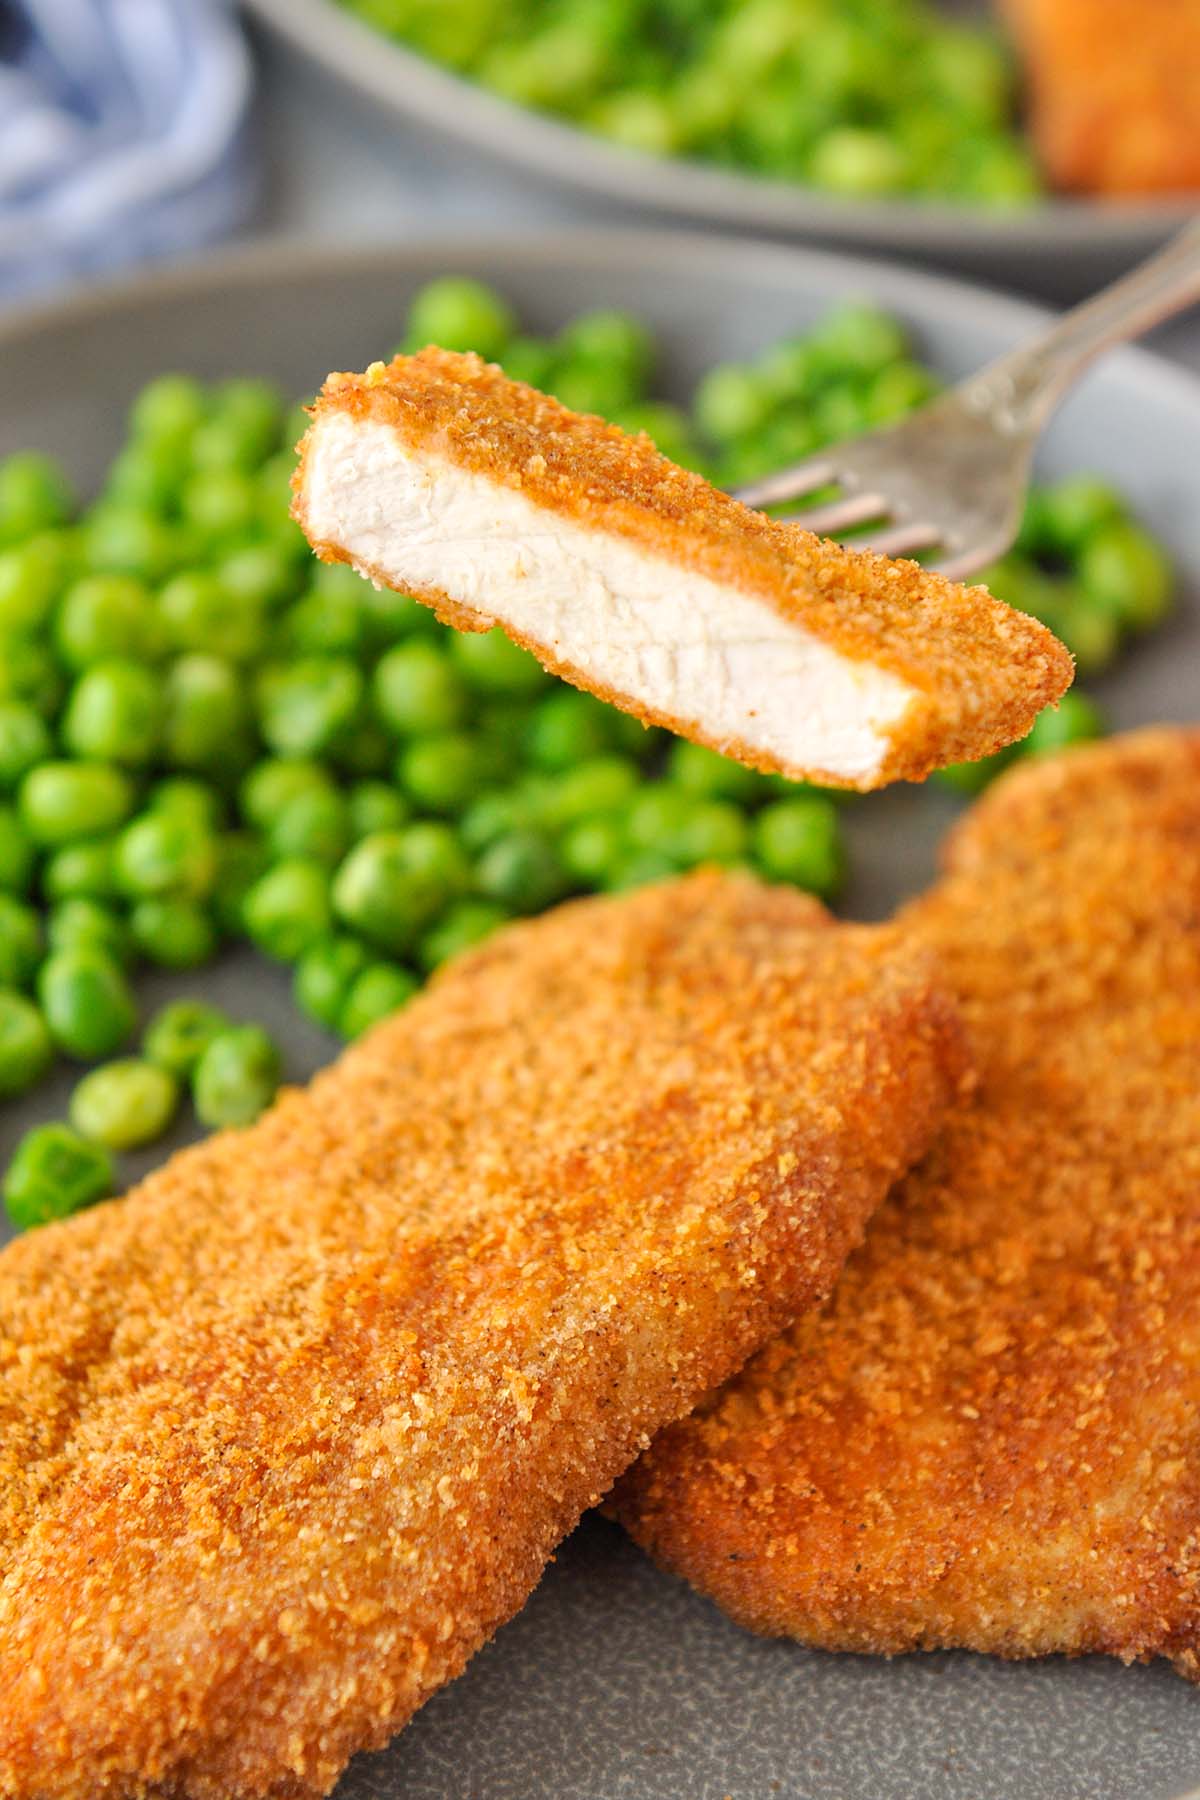 A bite of pork chop on a fork over a plate of pork chops and peas.